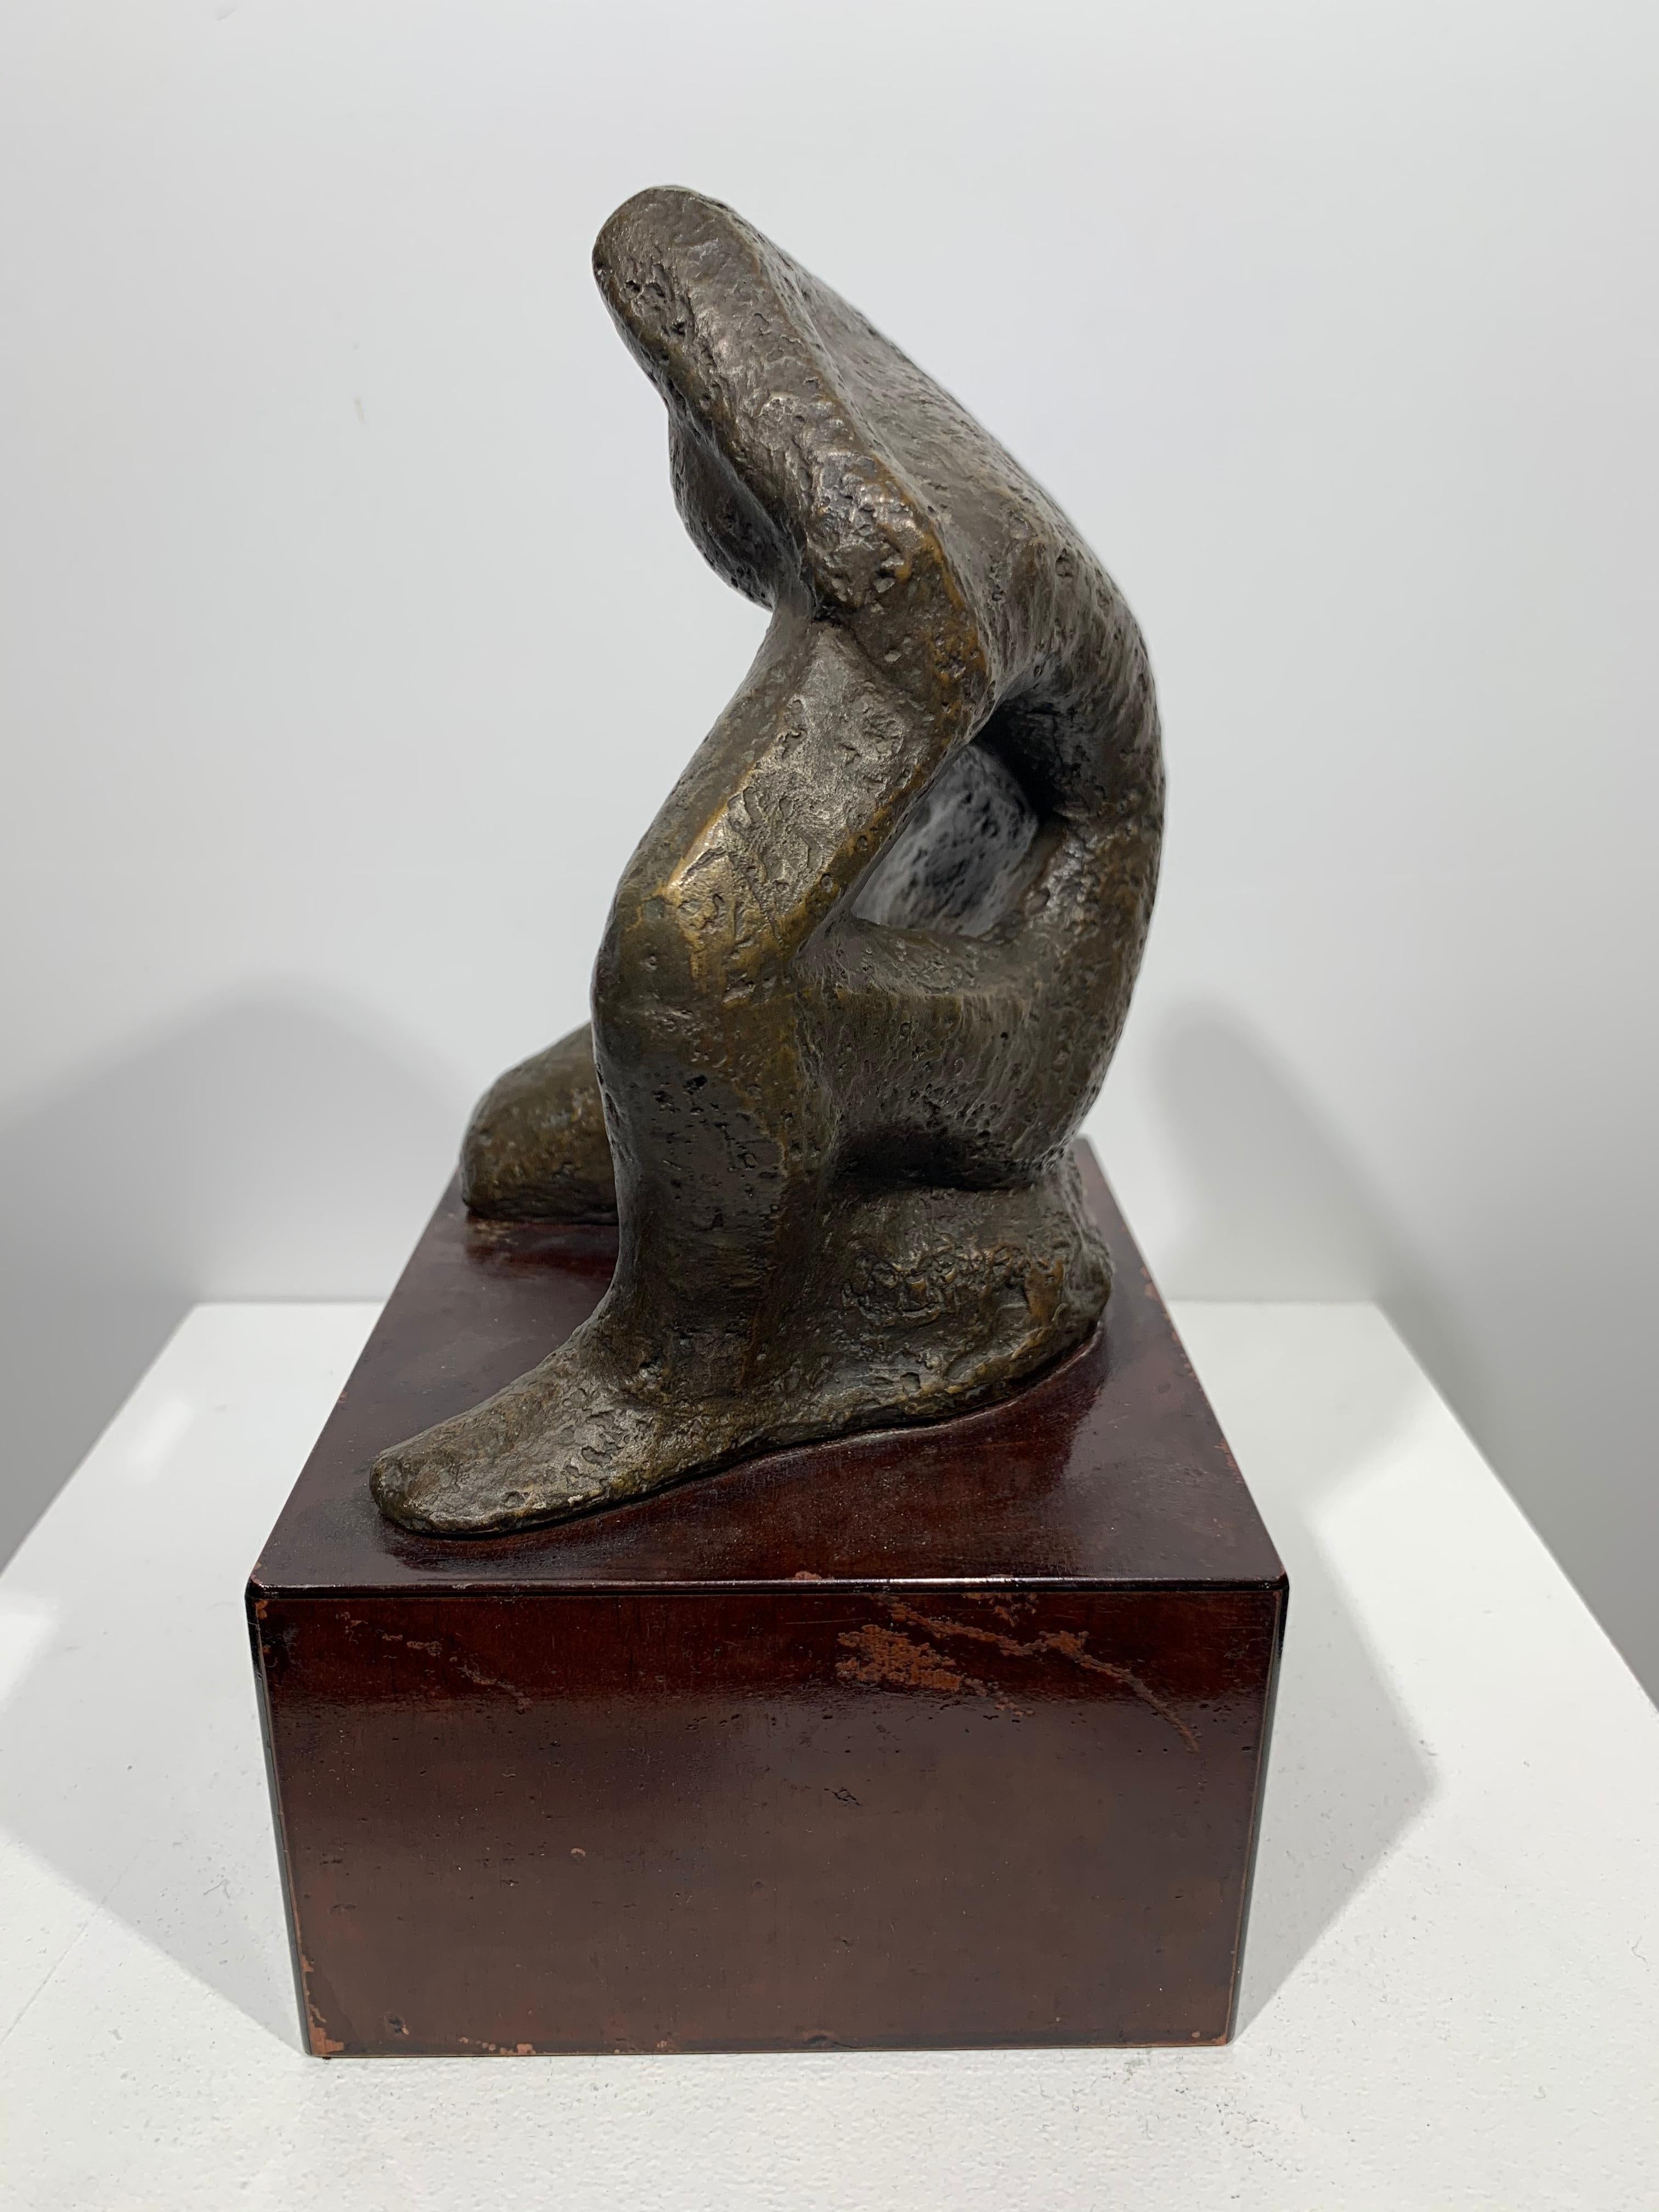 Beautiful c.1950 abstract female sculpture by American artist, Nancy Dryfoos (1919-1991). Cast bronze on mahogany wood base, casting measures 6.25